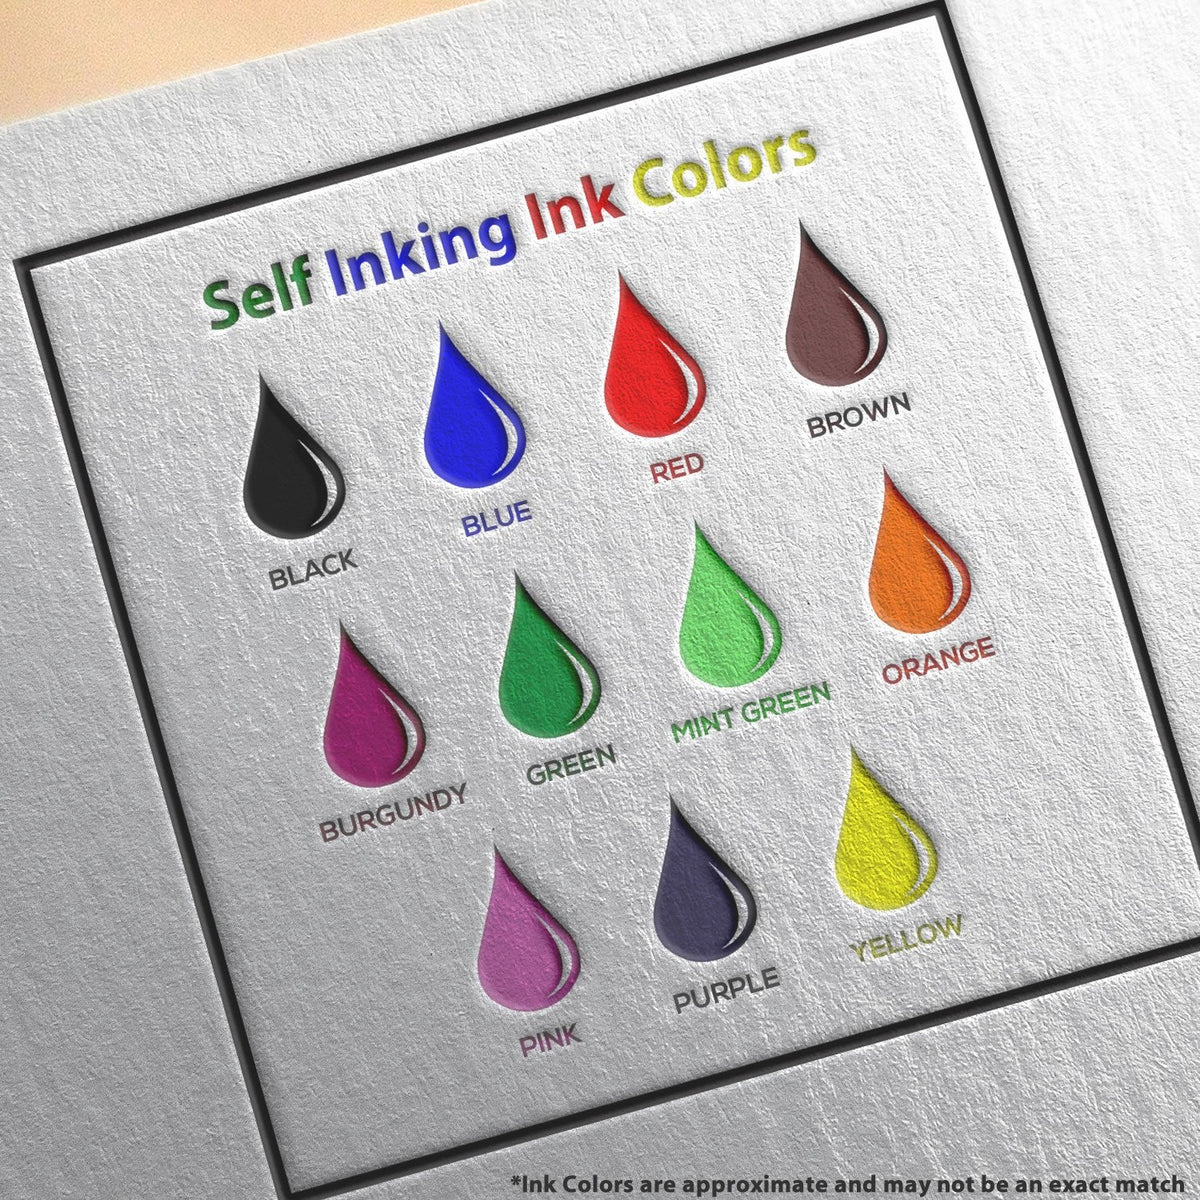 Self-Inking Insurance Verified Stamp Ink Color Options